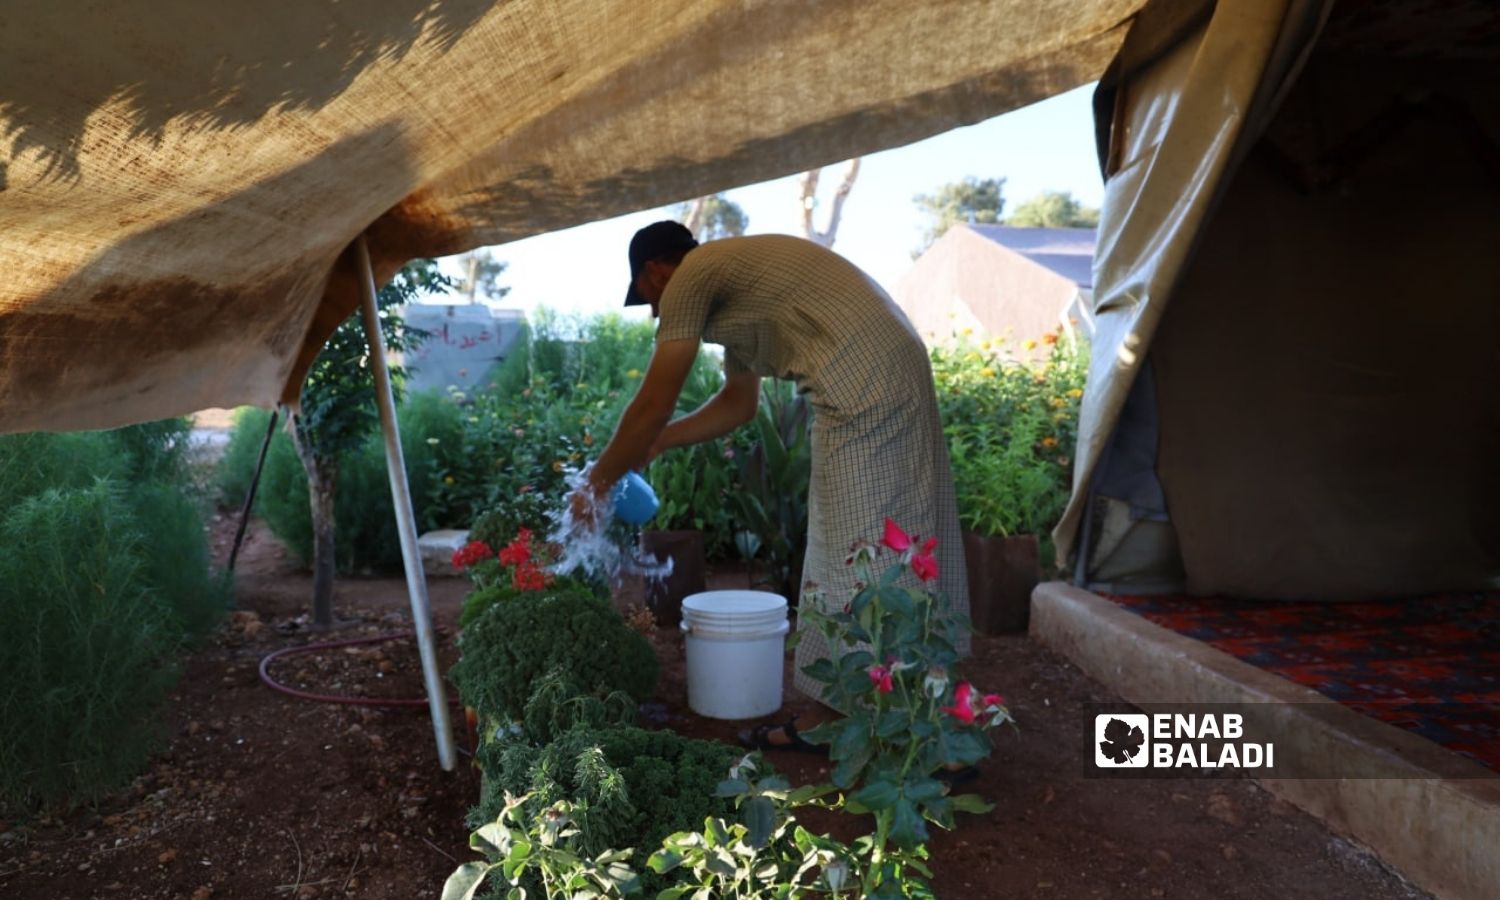 Displaced people in the camps of Afrin area in Aleppo countryside planting flowers around their tents - 25 July 2022 (Enab Baladi/Amir Kharboutli)